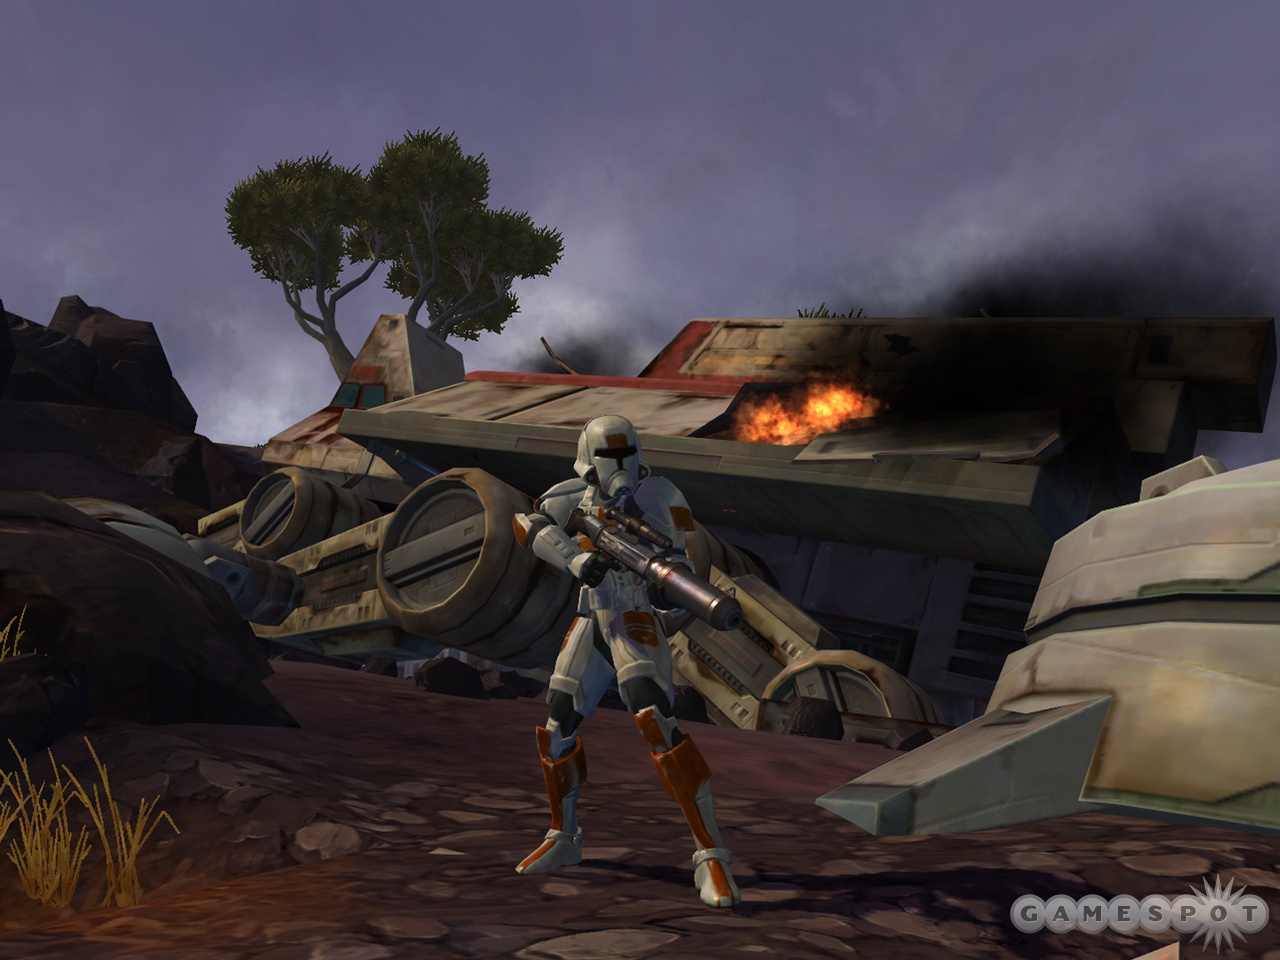 Trooper characters' heavy armor and weapons will make them a force to be reckoned with.